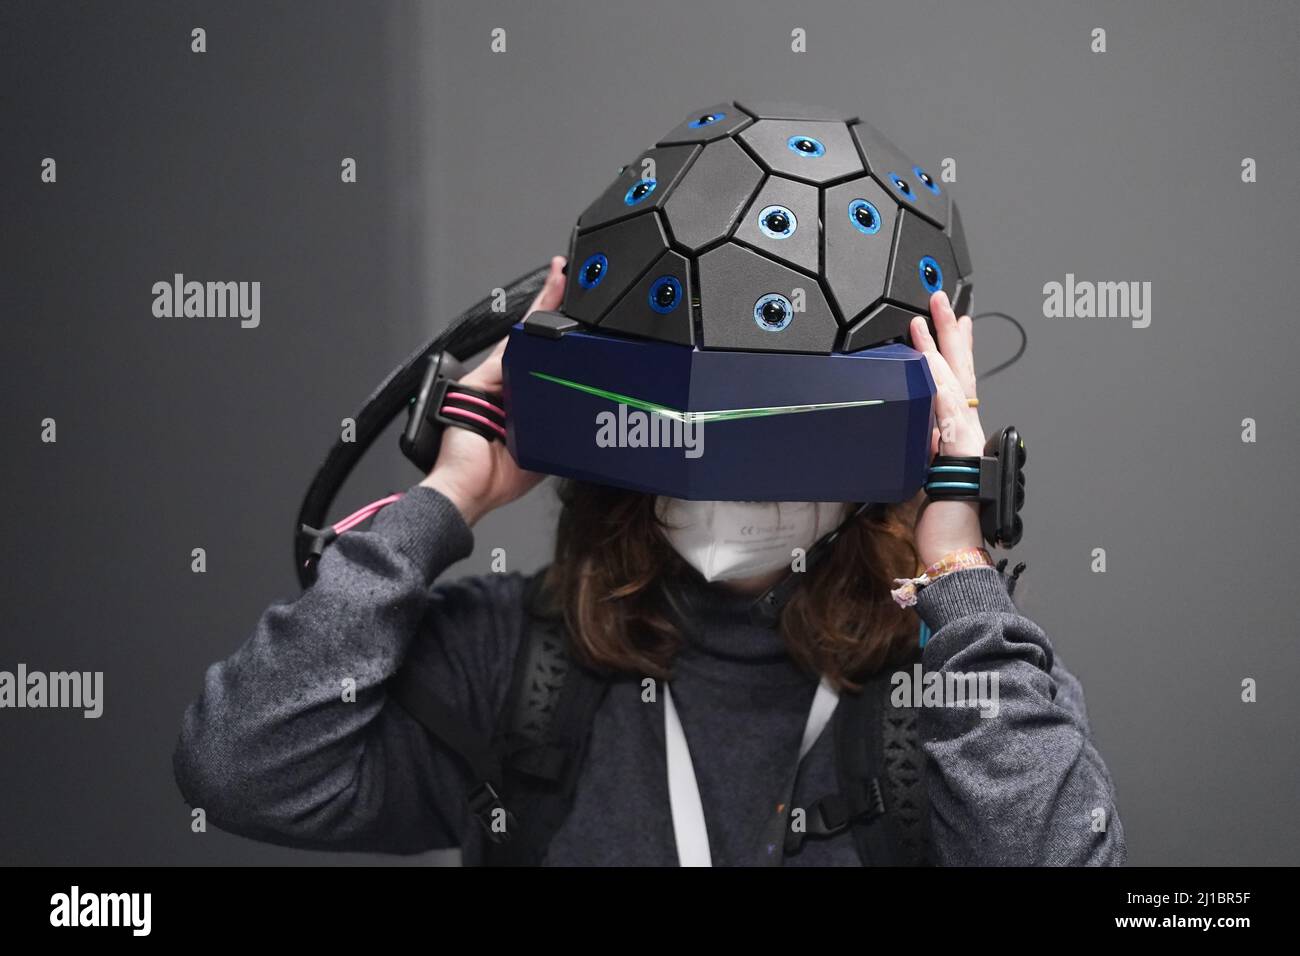 et eller andet sted Pudsigt Rede 24 March 2022, Hamburg: A visitor stands with backpack and helmet as well  as hand and foot sensors and tracker in the new virtual reality attraction  "Yullbe" (abbreviation for You will be)